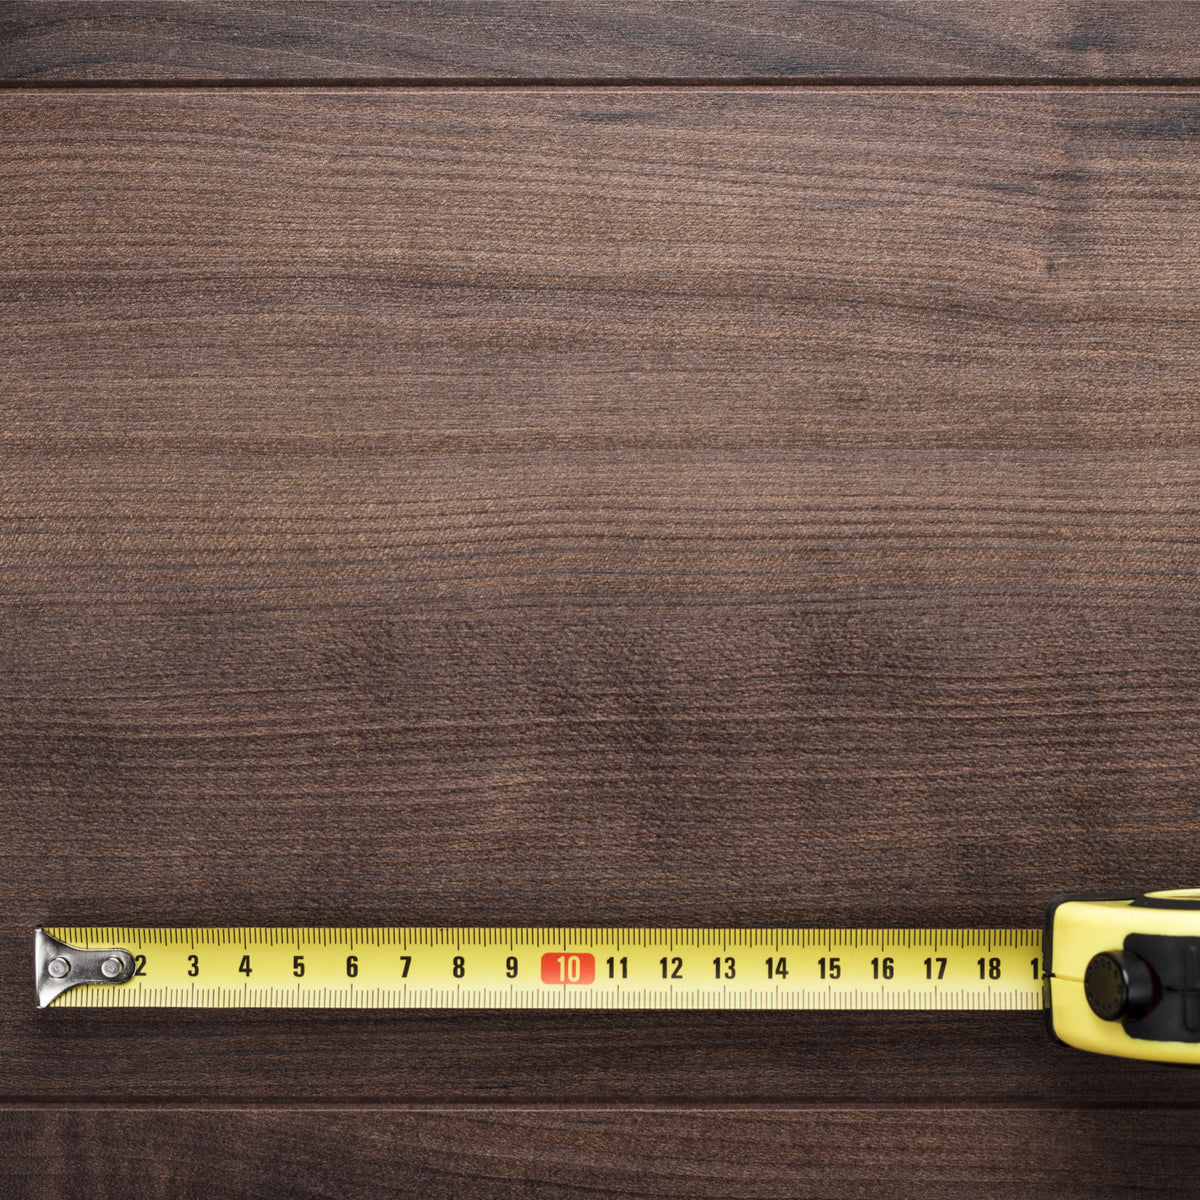 A QUICK GUIDE on how to measure cabinet pulls for your kitchen